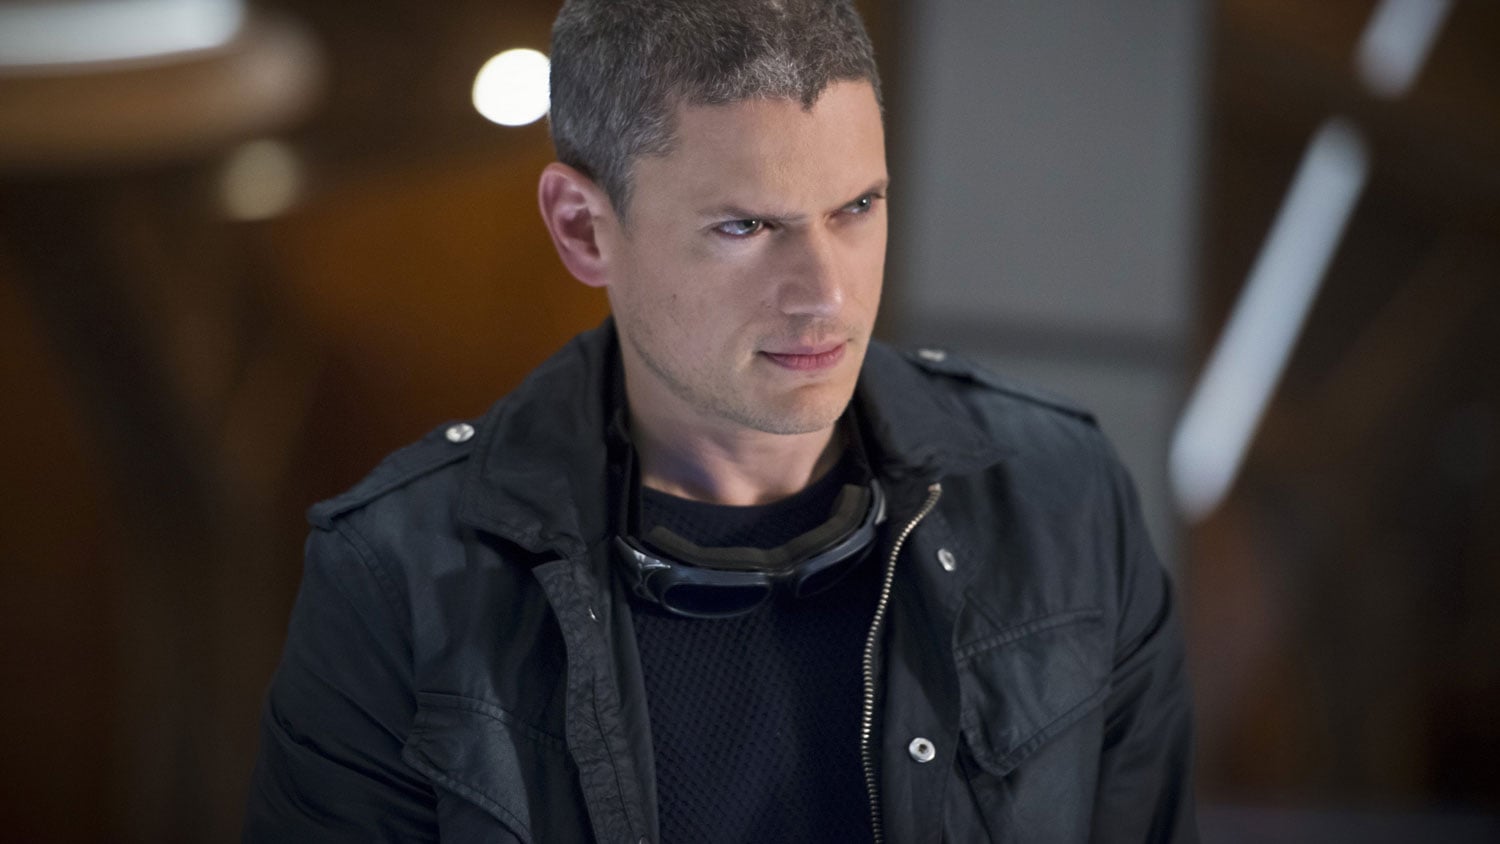 Legends Of Tomorrow Captain Cold Wentworth Miller